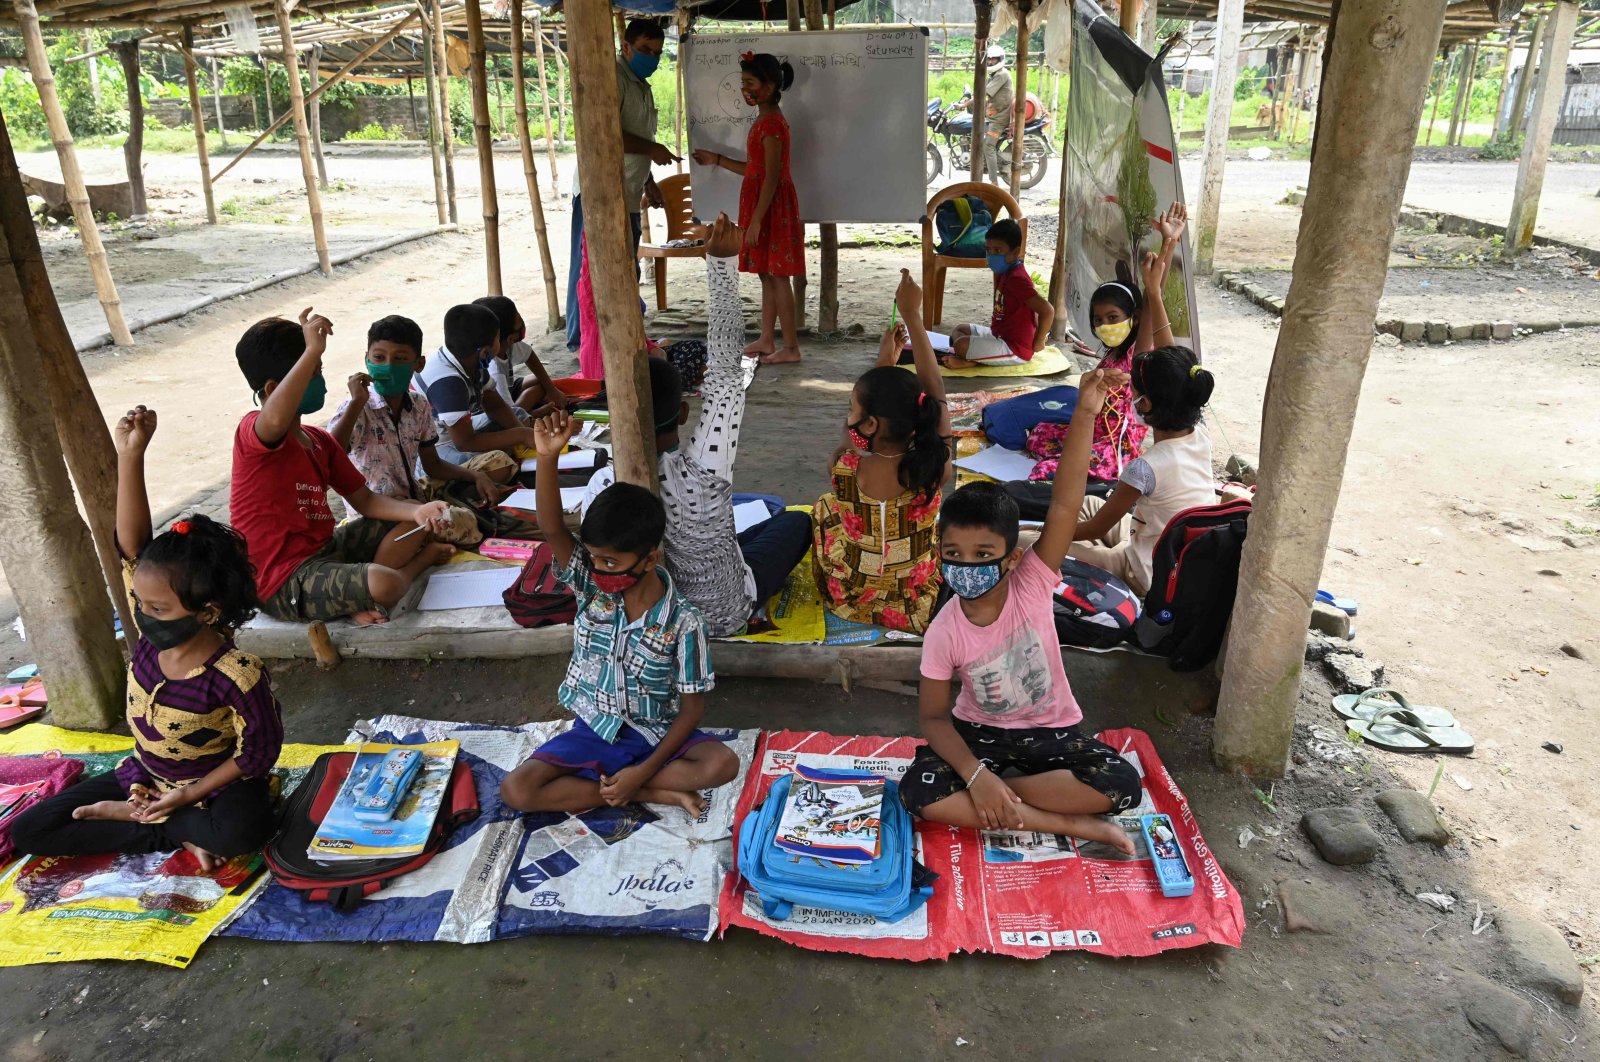 Children attend a class organized by a nongovernmental organization (NGO) as schools remain closed in West Bengal state due to COVID-19 restrictions, at a temporary market site on the outskirts of Kolkata, India, Sept. 4, 2021. (AFP Photo)